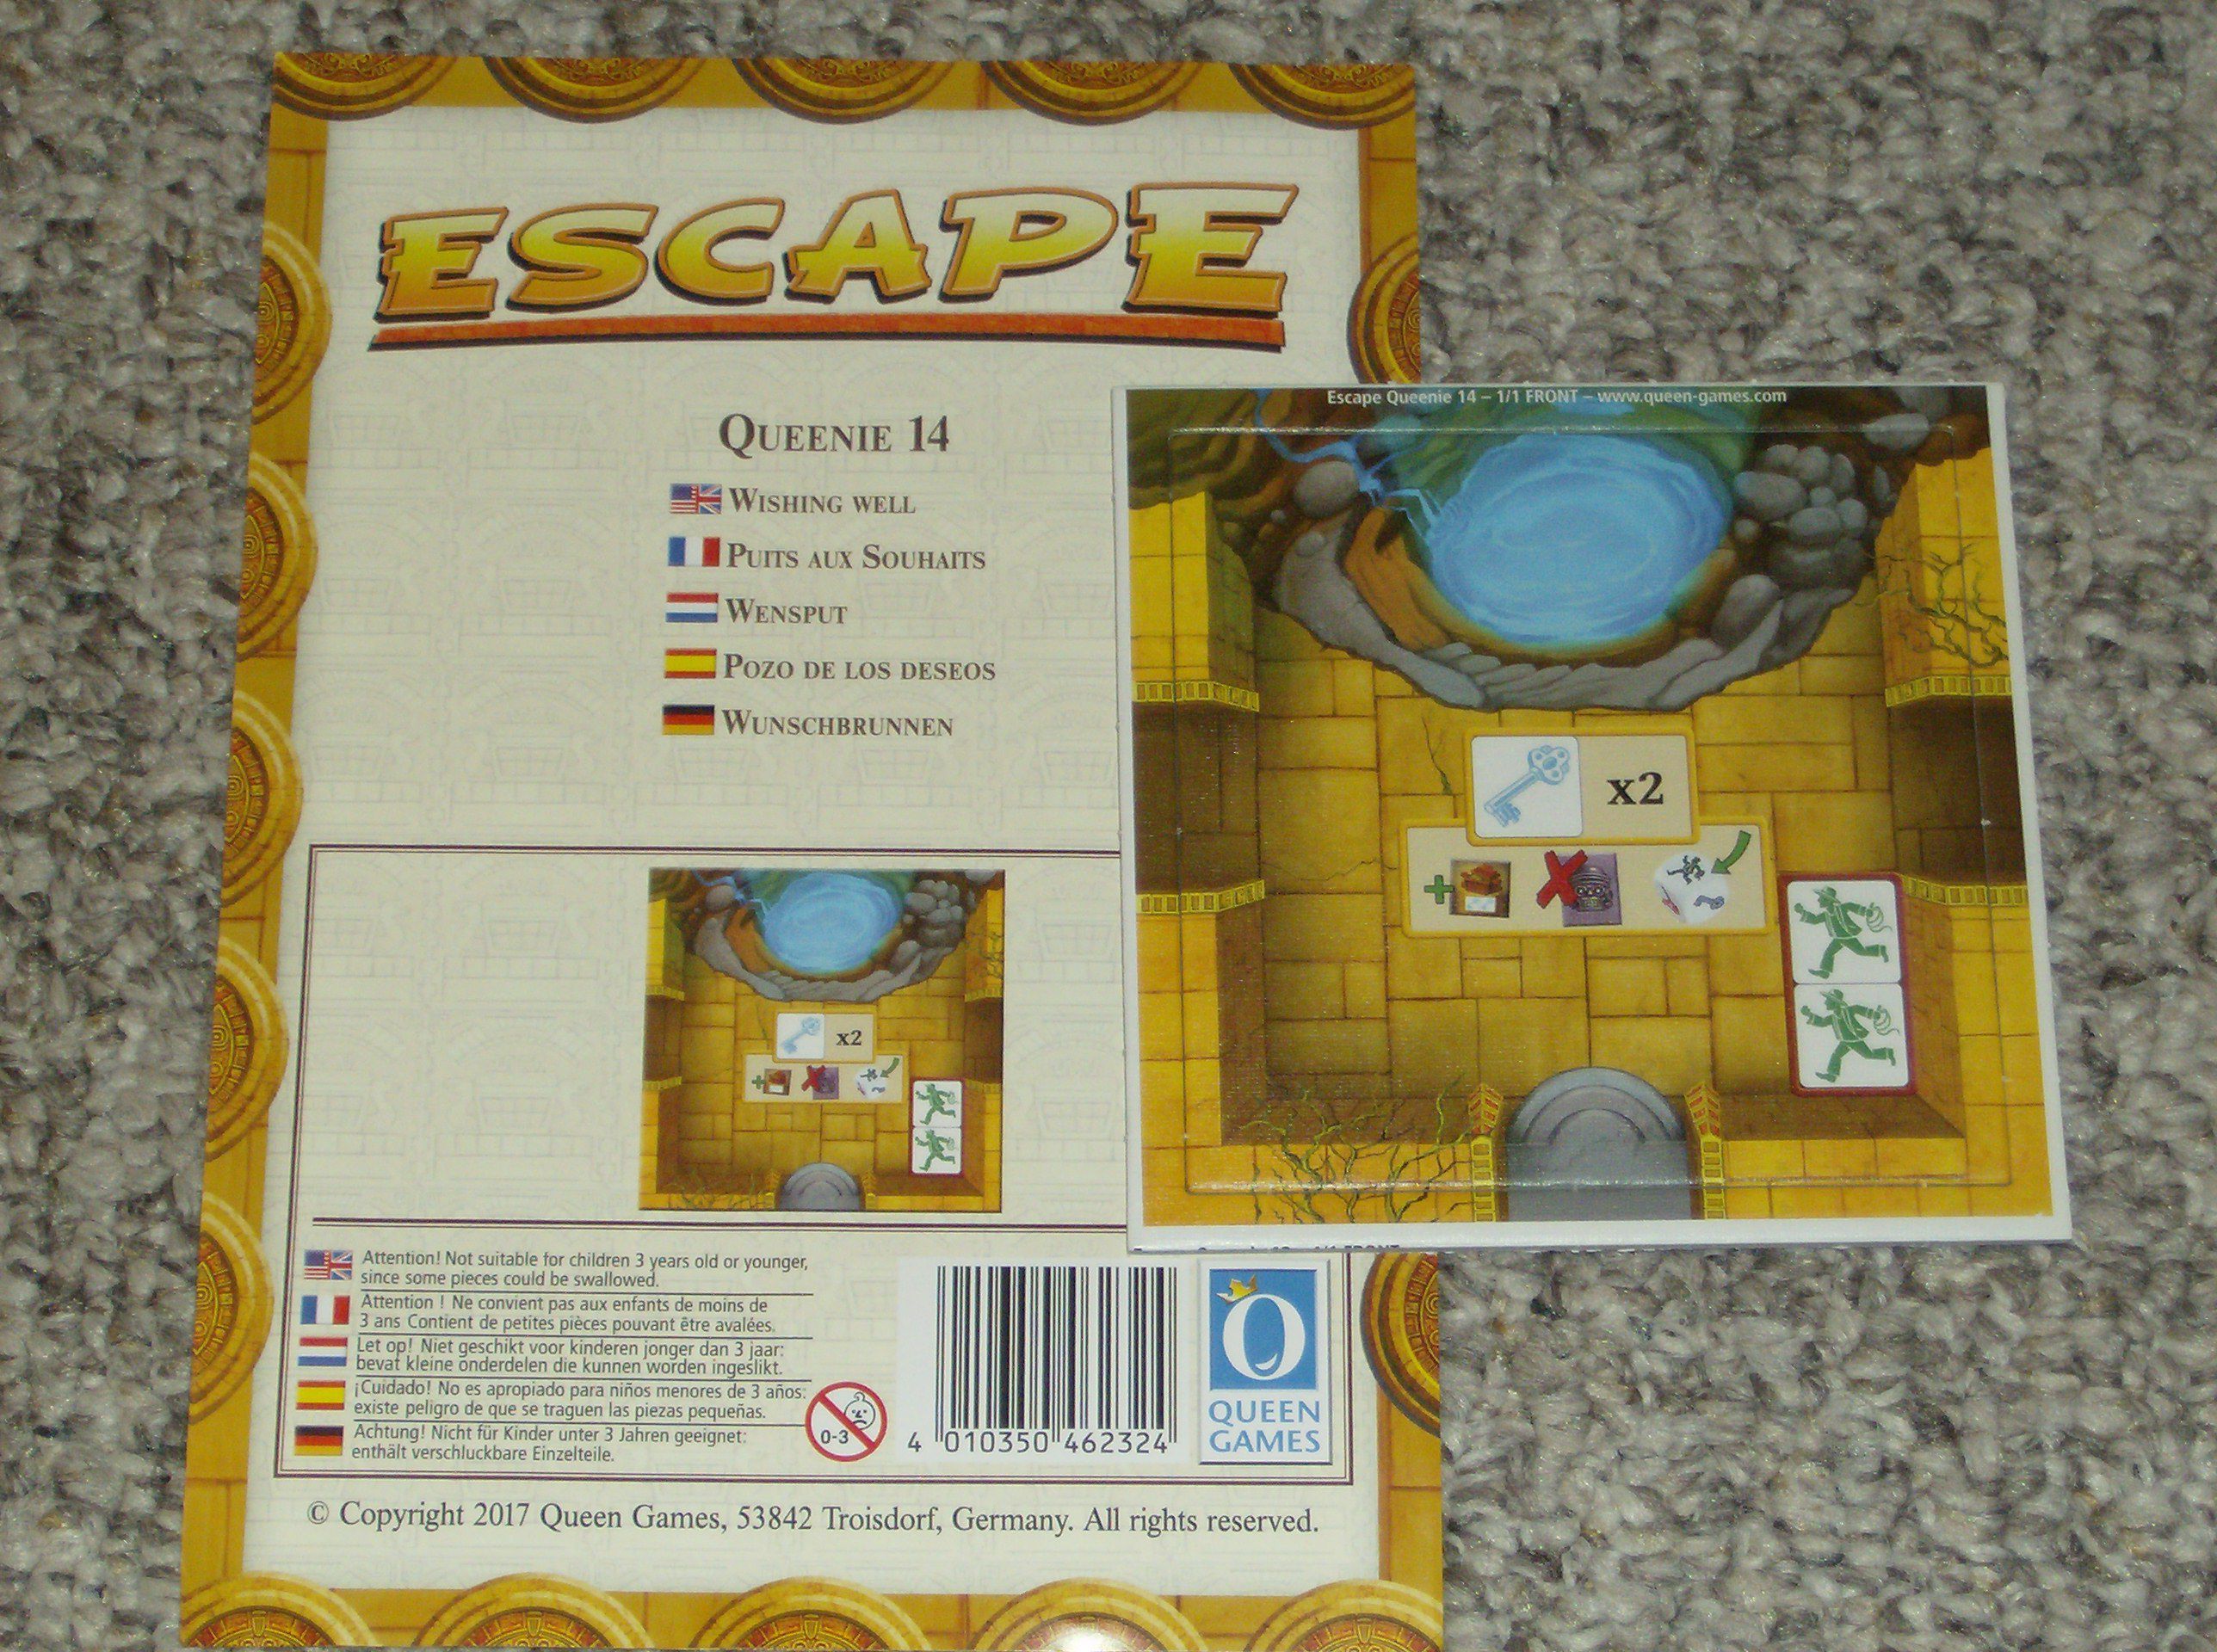 Escape: The Curse of the Temple – Queenie 14: Wishing Well